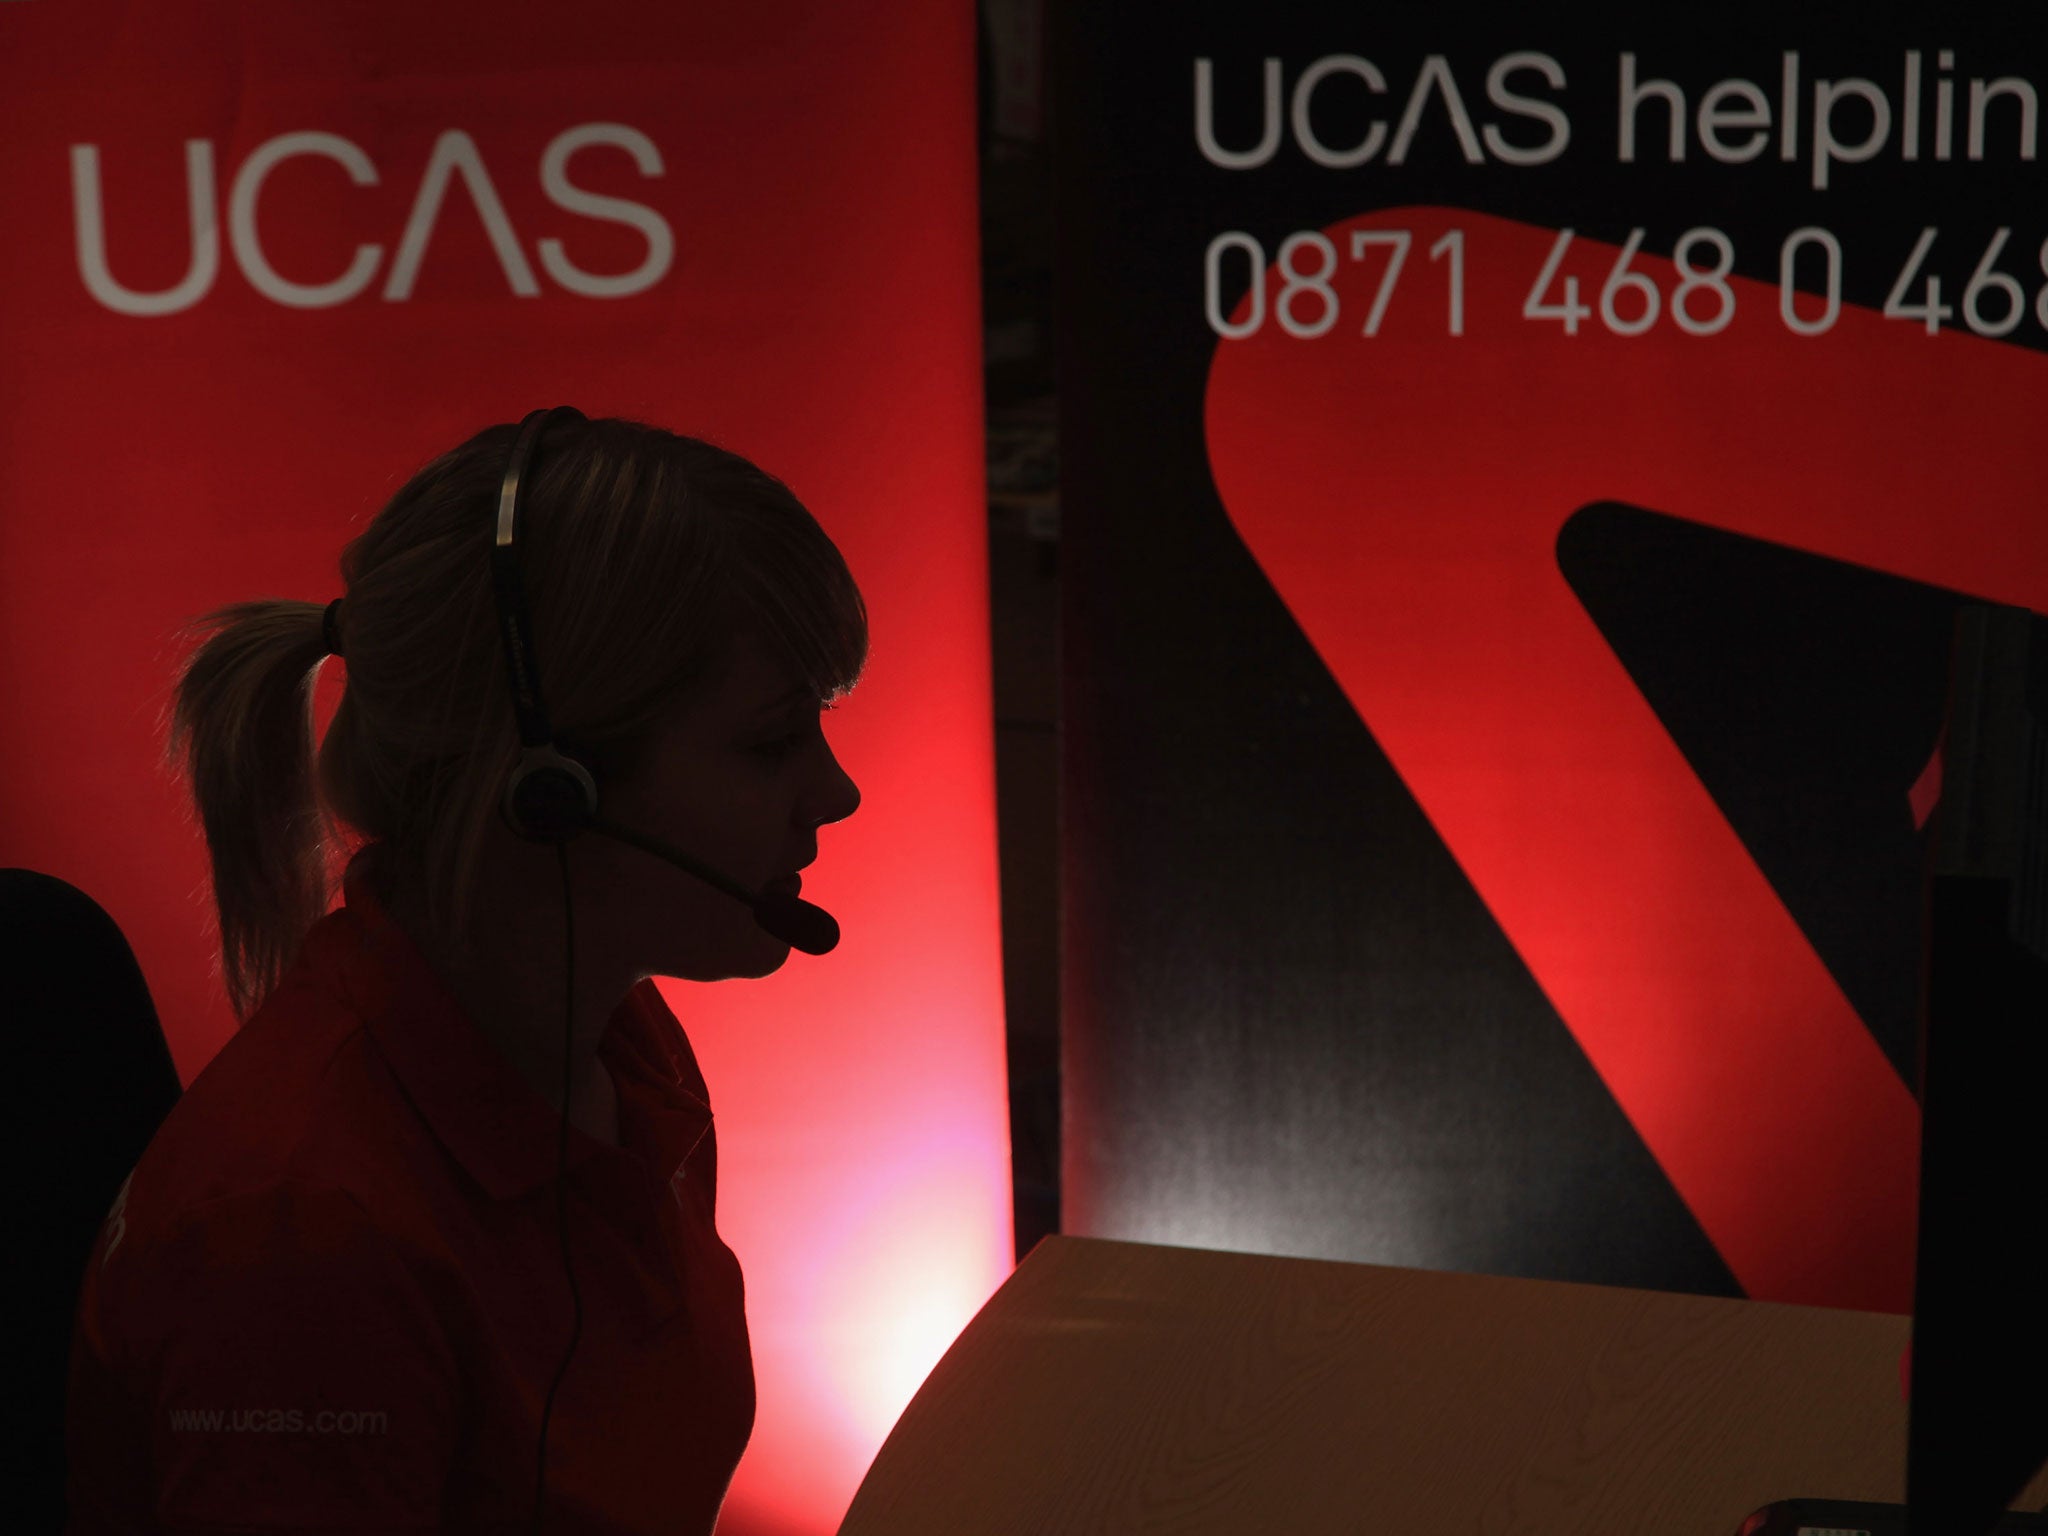 A Ucas employee at the service’s clearing house call centre